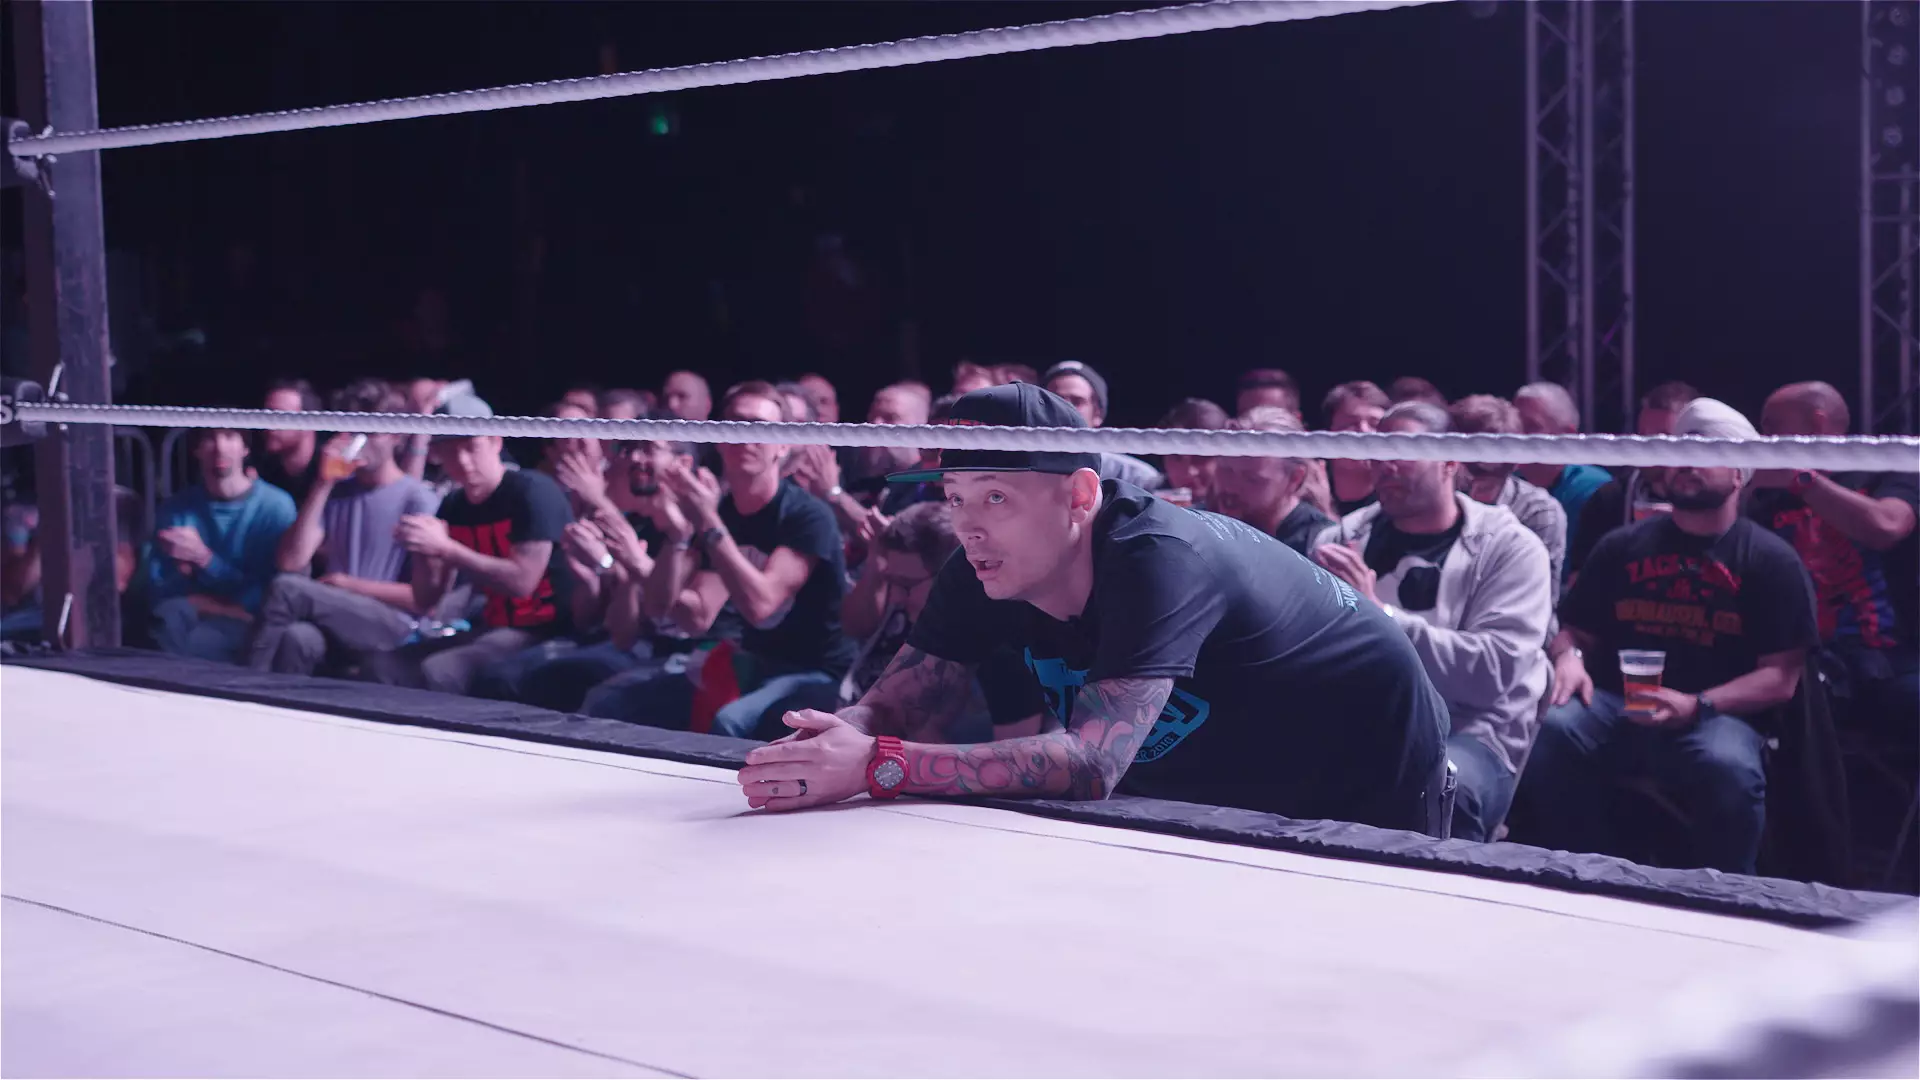 No better view than that of Jim Smallman and no better sight than watching the co-owner react to what's going on in the ring. 